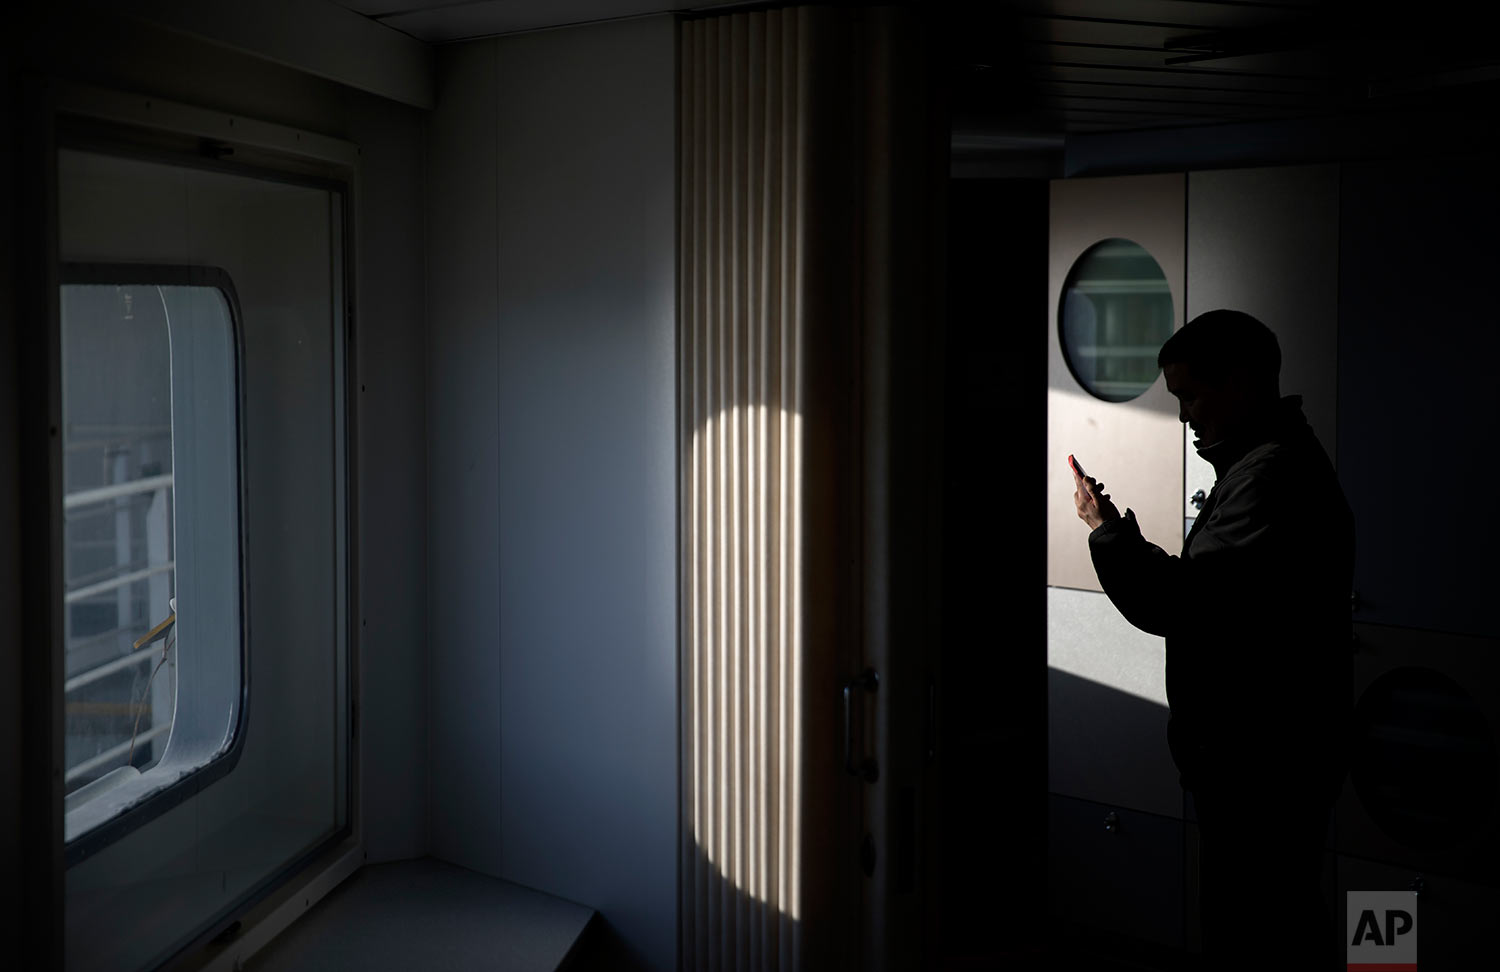  Trainee Maatiusi Manning tries to video chat with his family aboard the Finnish icebreaker MSV Nordica as it traverses the Northwest Passage through the Canadian Arctic Archipelago Wednesday, July 26, 2017. After two weeks at sea the ship's fragile 